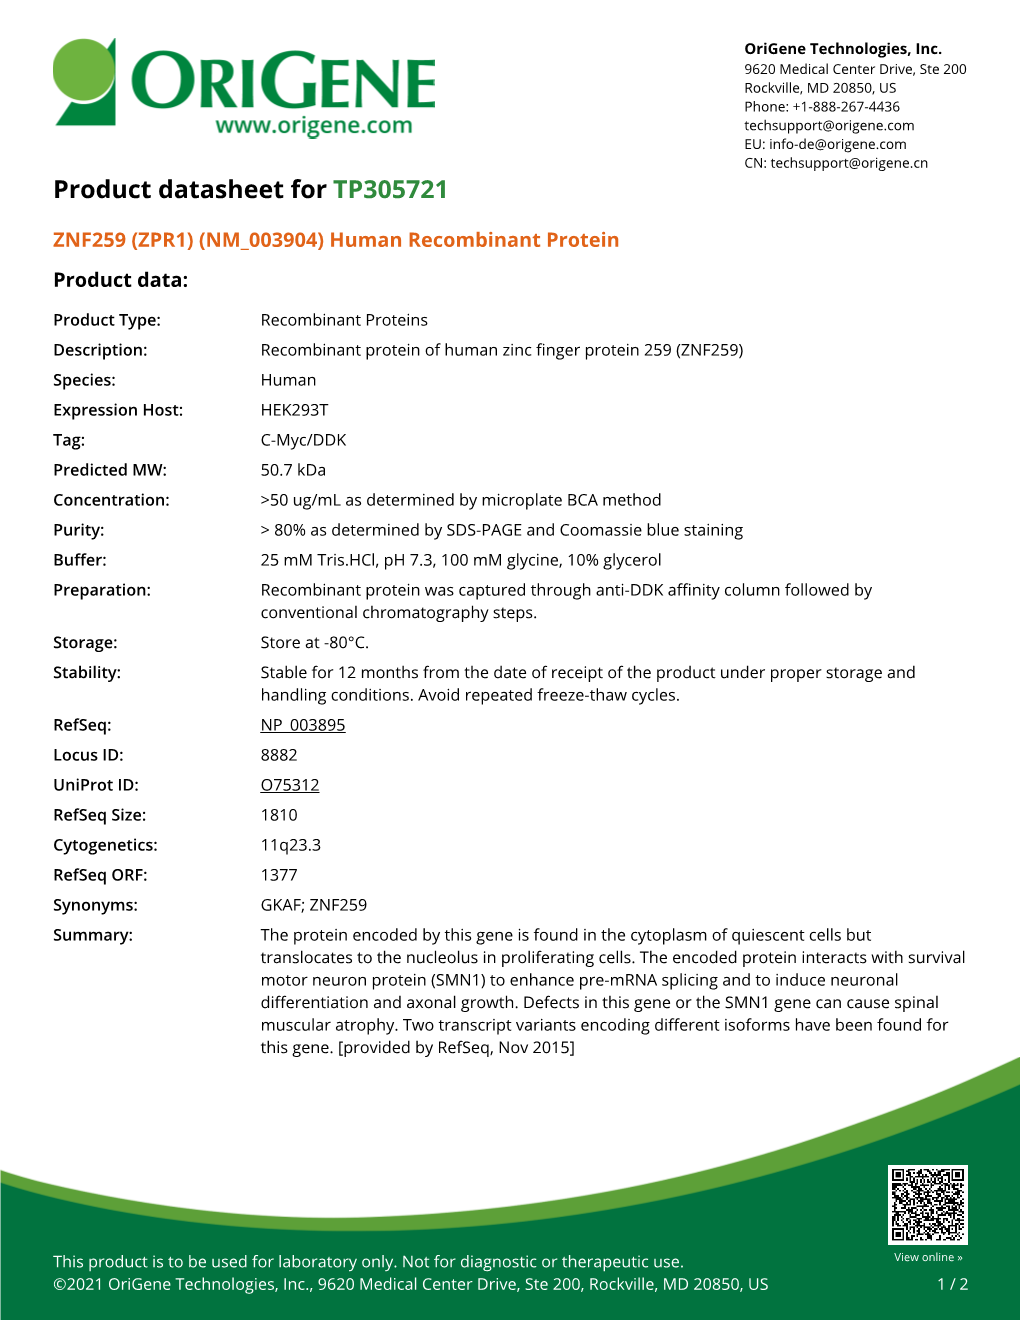 ZNF259 (ZPR1) (NM 003904) Human Recombinant Protein Product Data